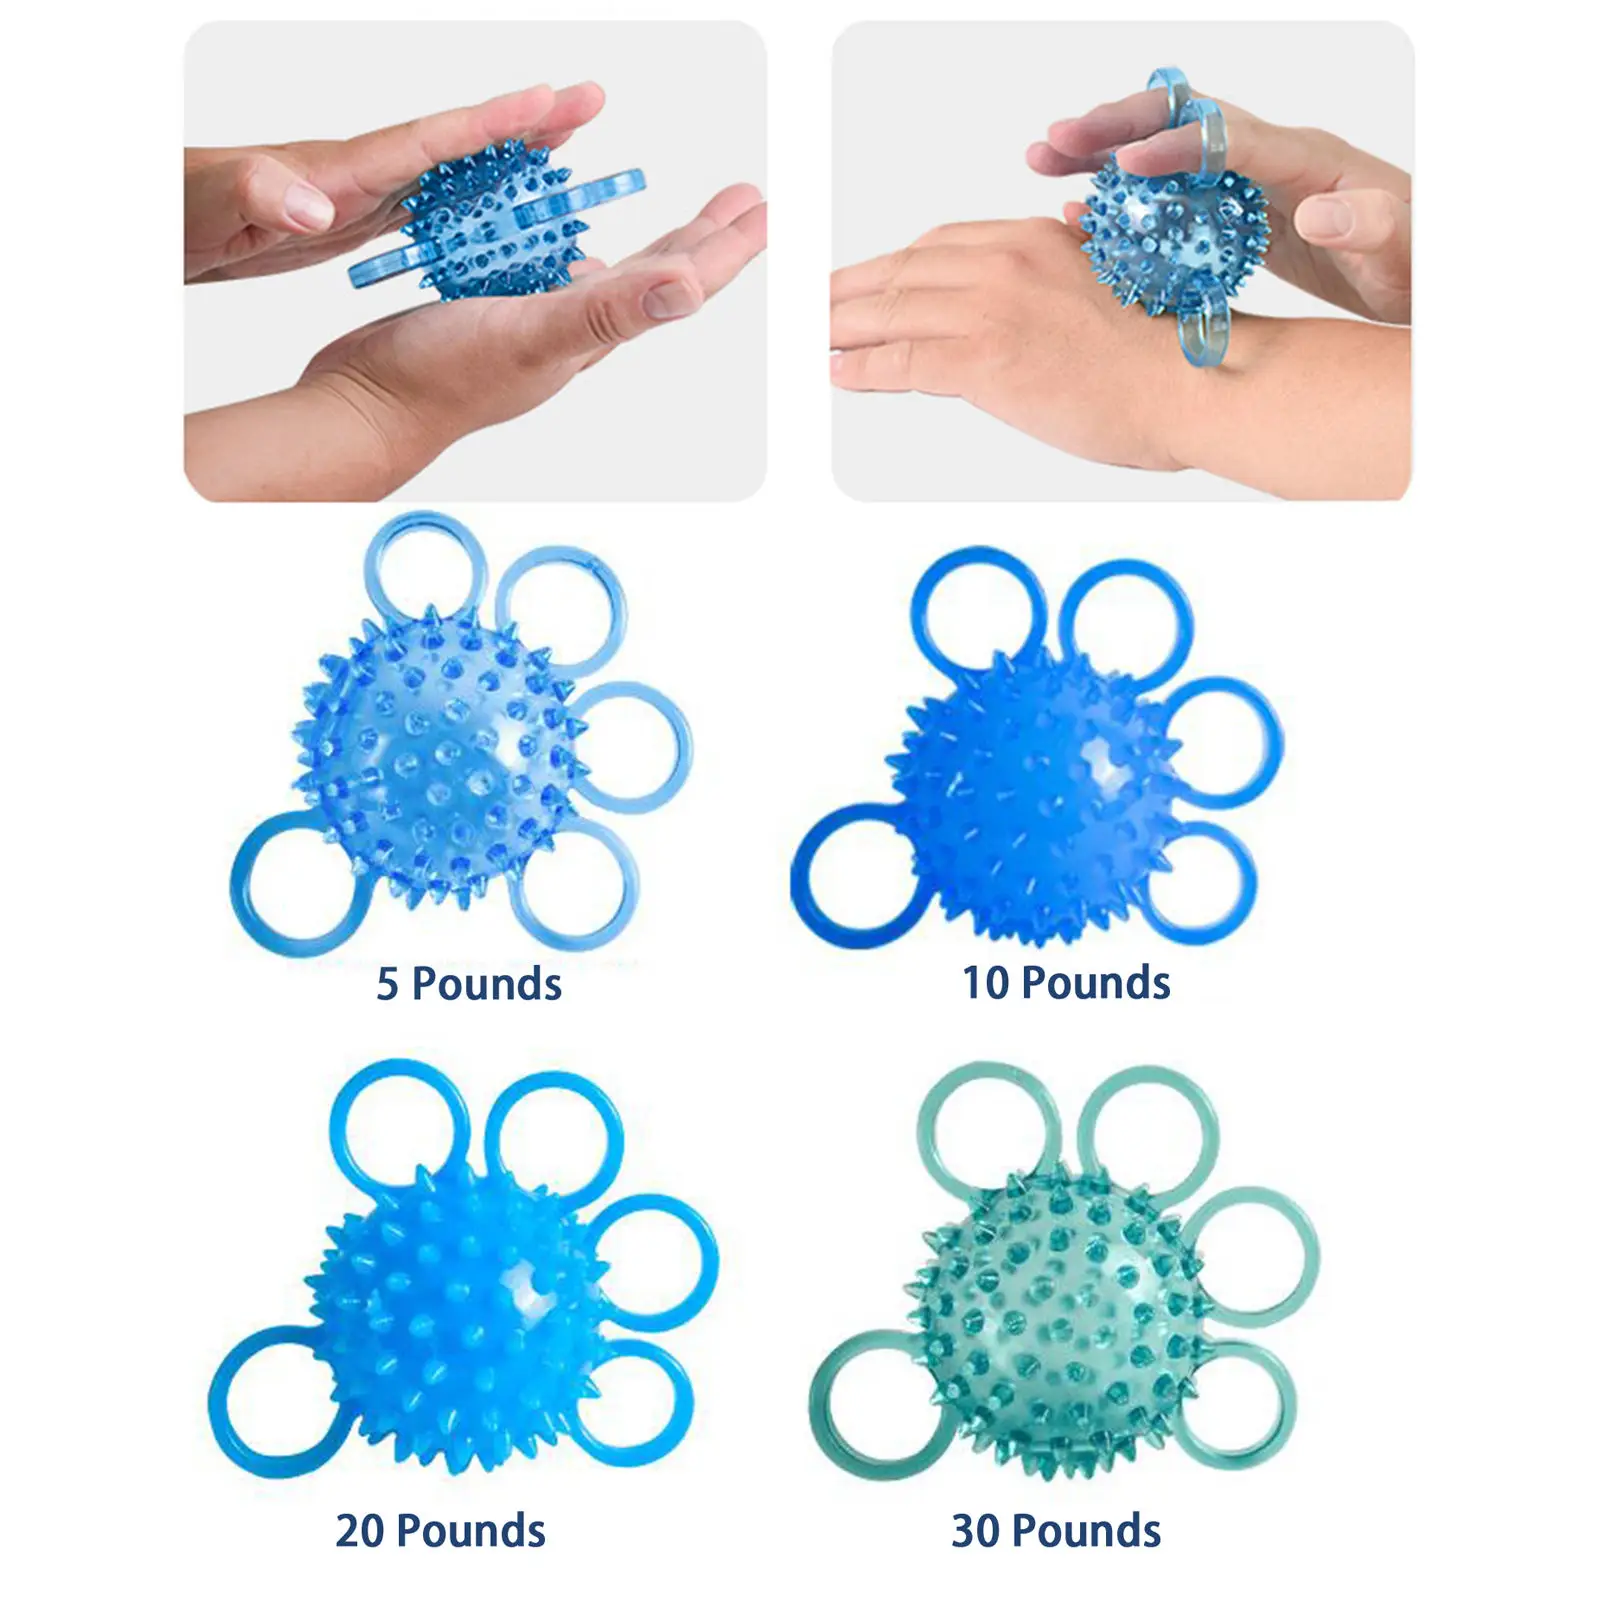 Hand Grip Ball Five Finger Force Training Strength Trainer Hedgehog for Elderly Adults